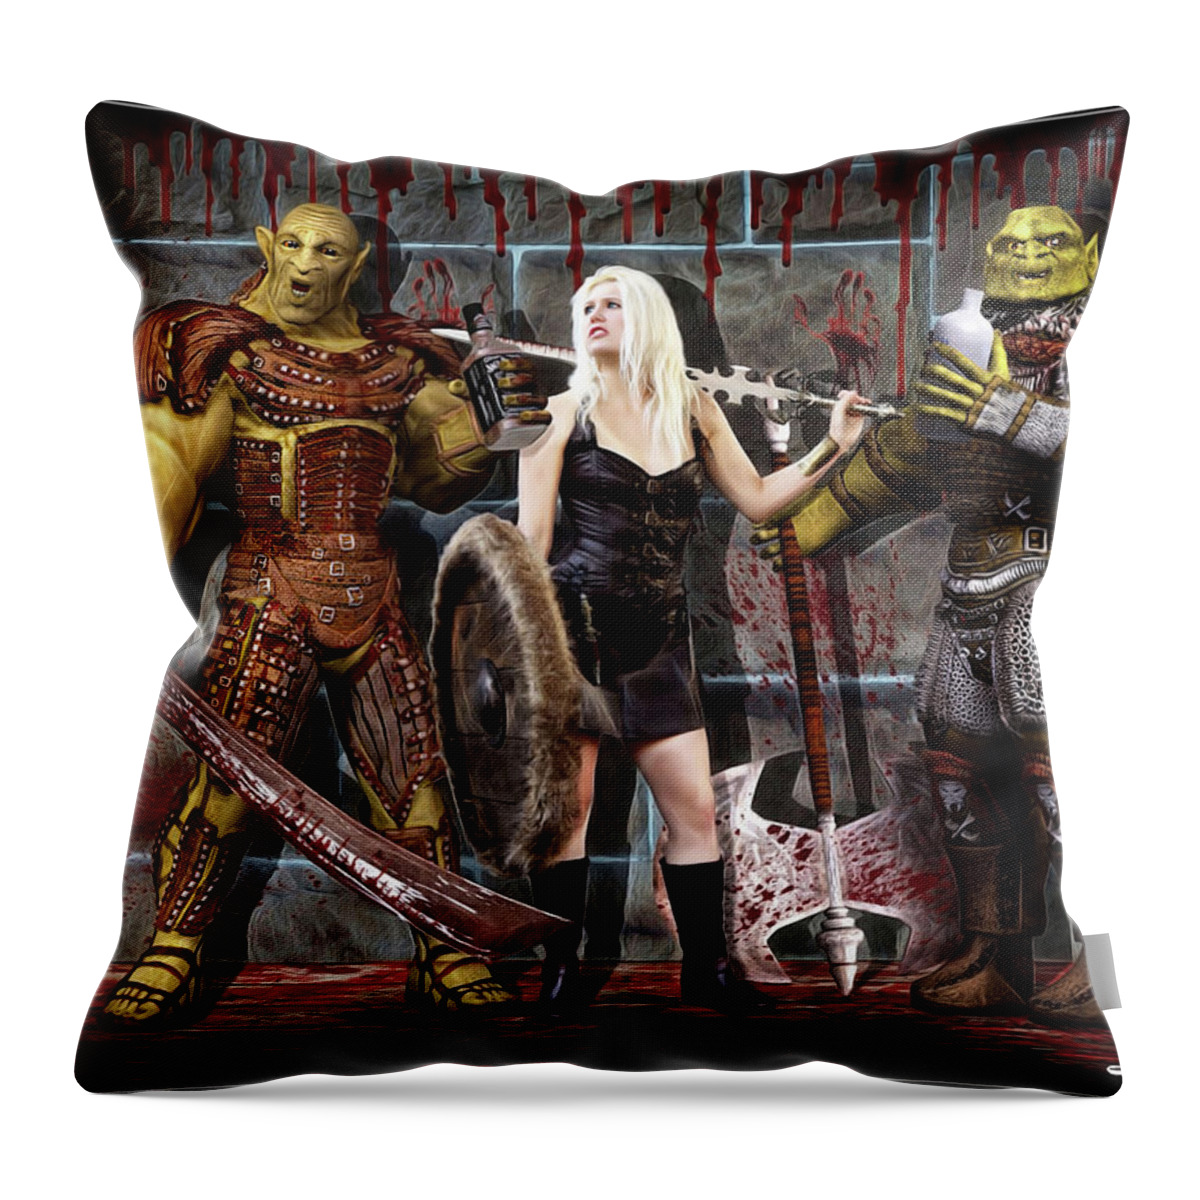 Fantasy Throw Pillow featuring the photograph Bad Company by Jon Volden